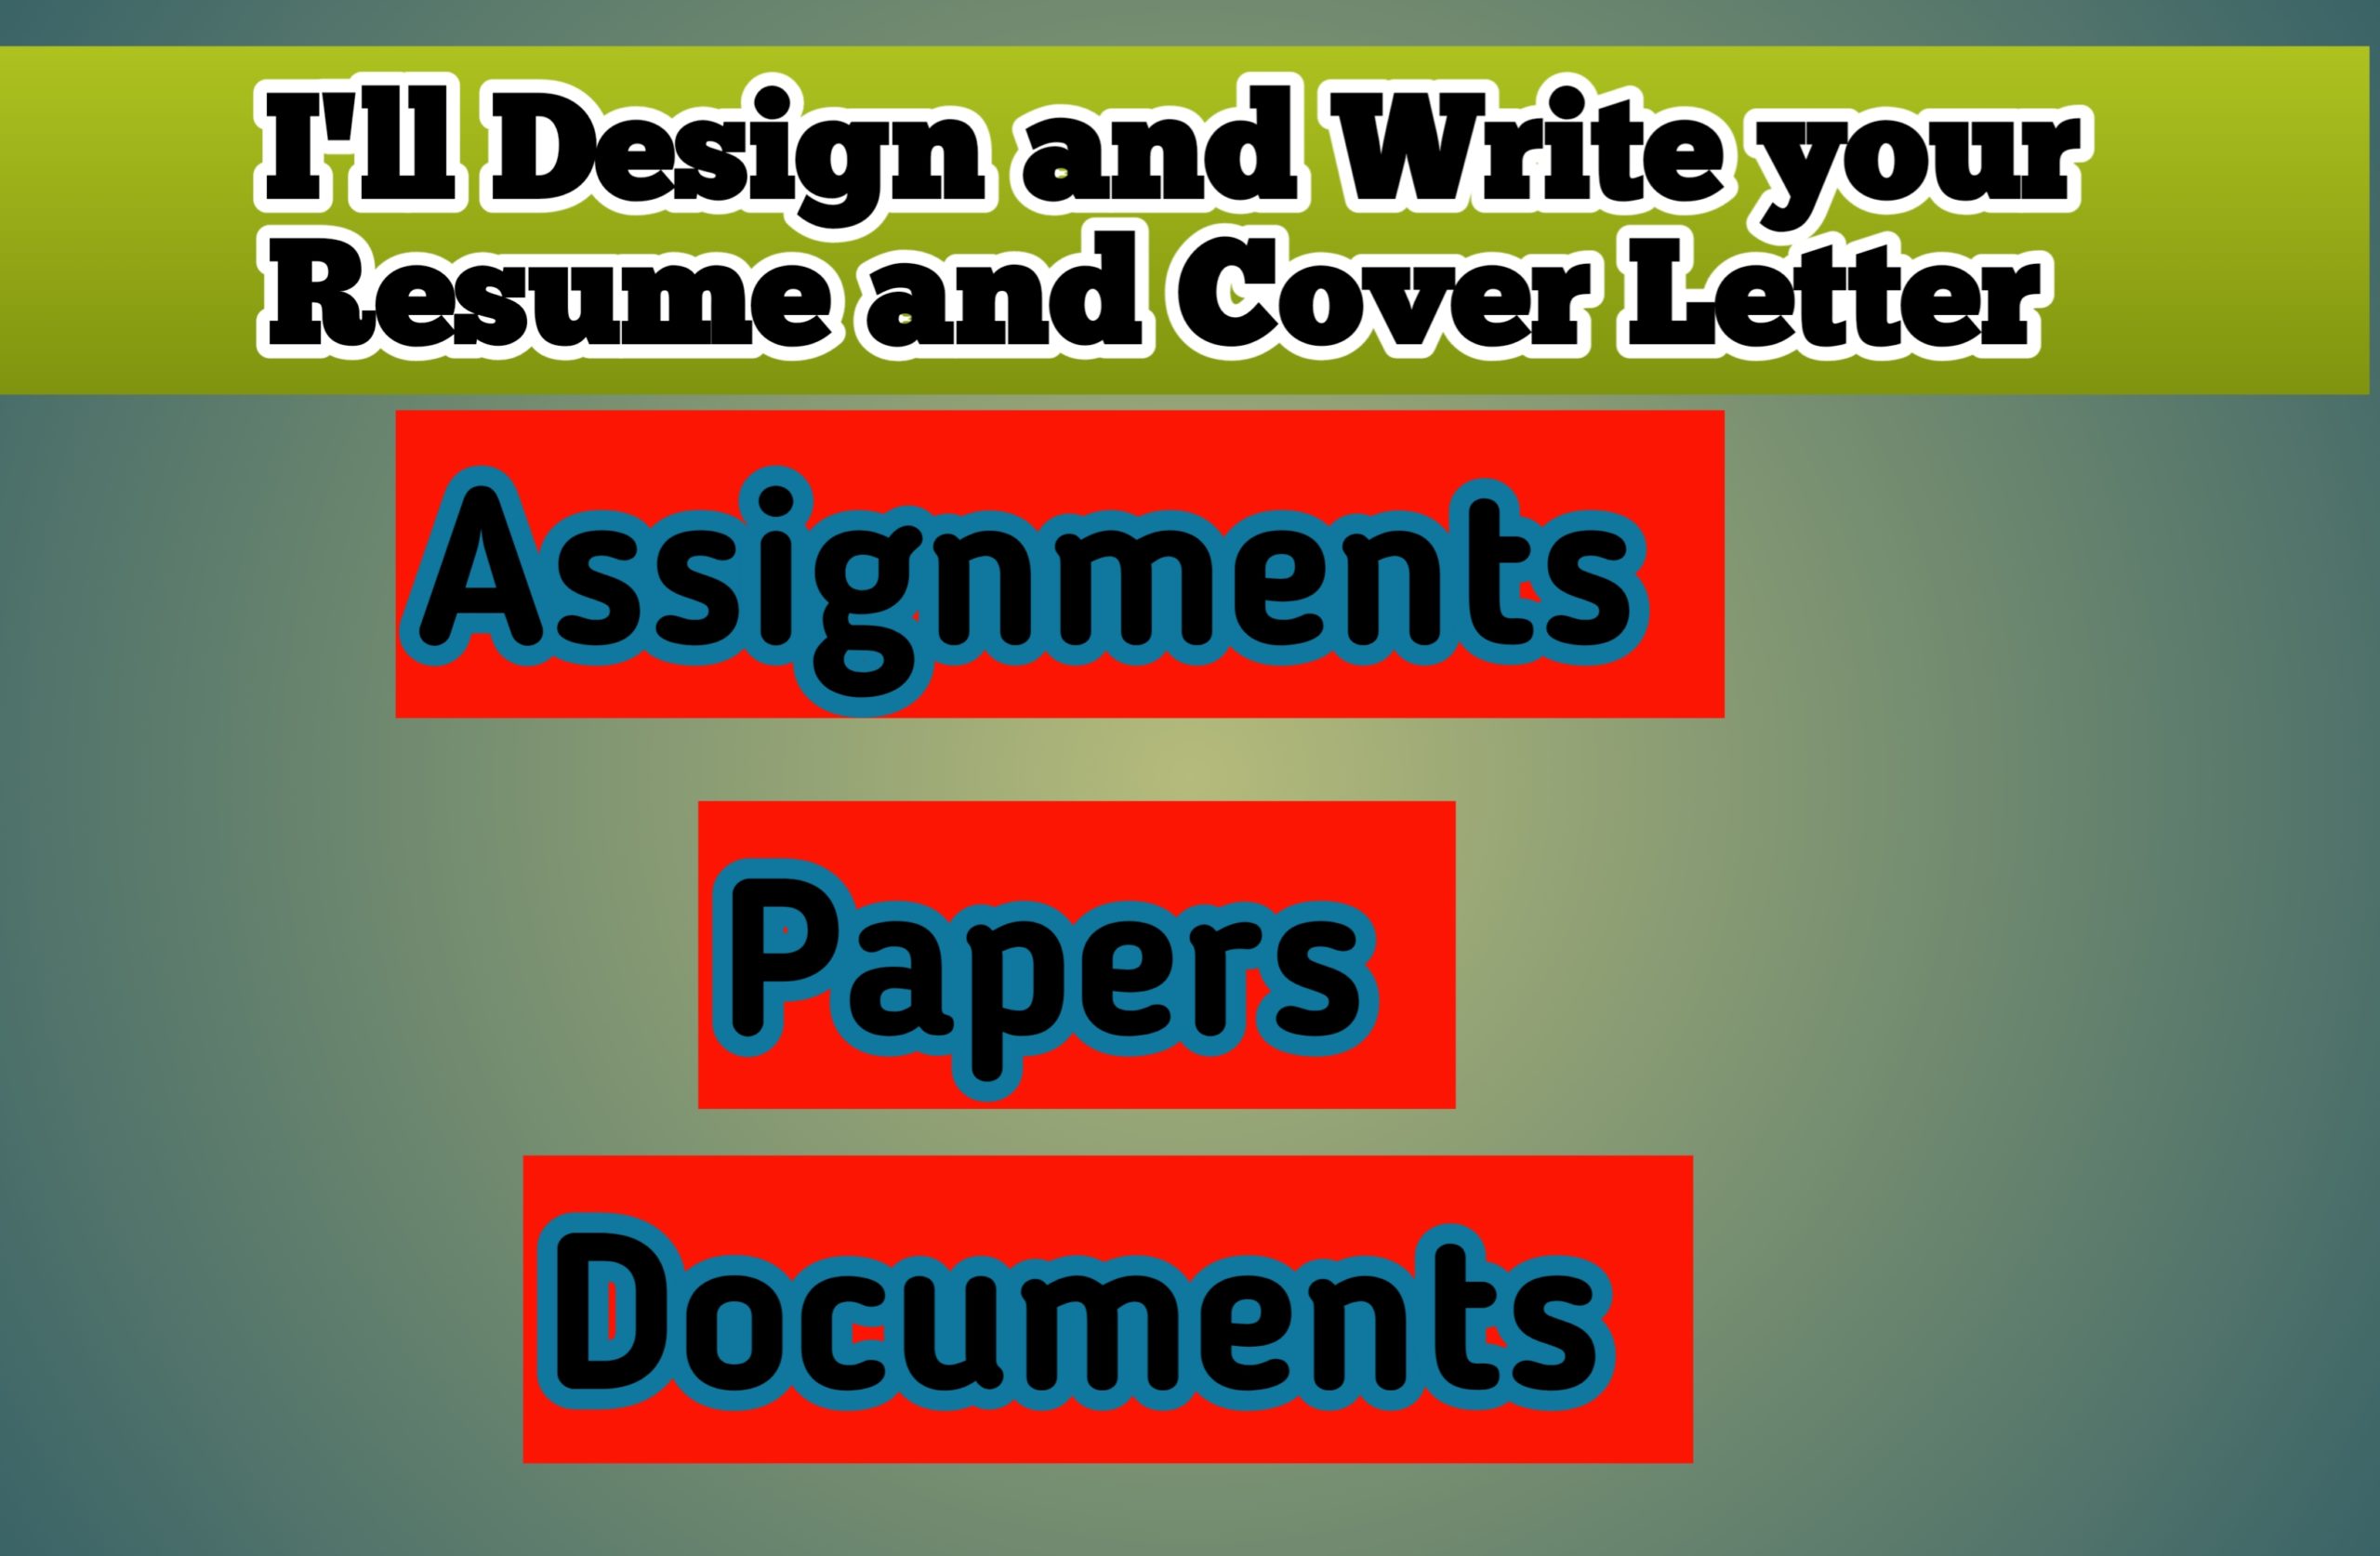 202849I’ll write assignments papers and document for students